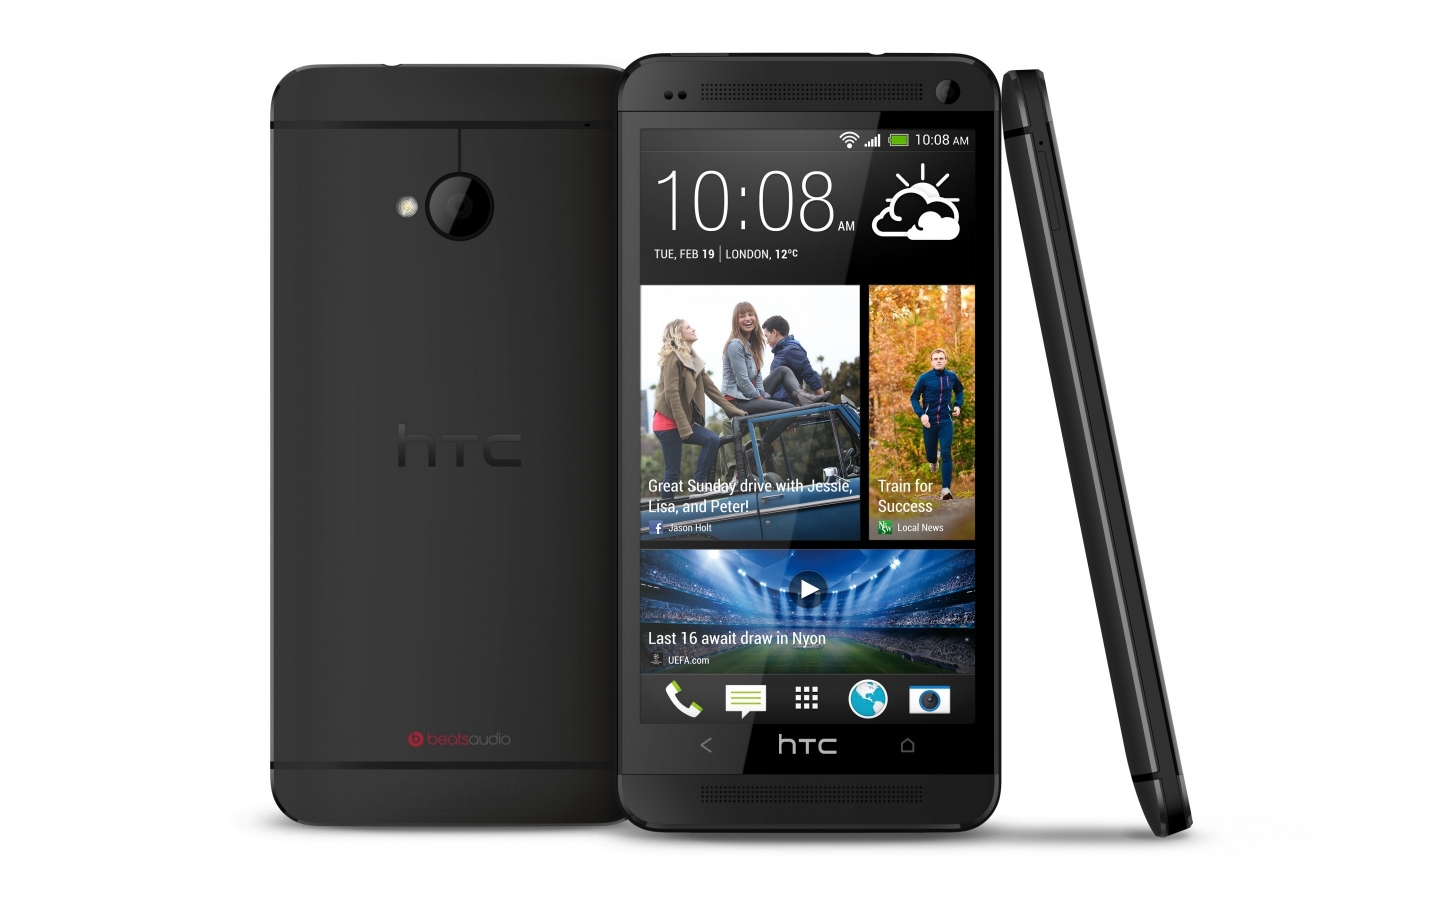 New HTC One for 1440 x 900 widescreen resolution